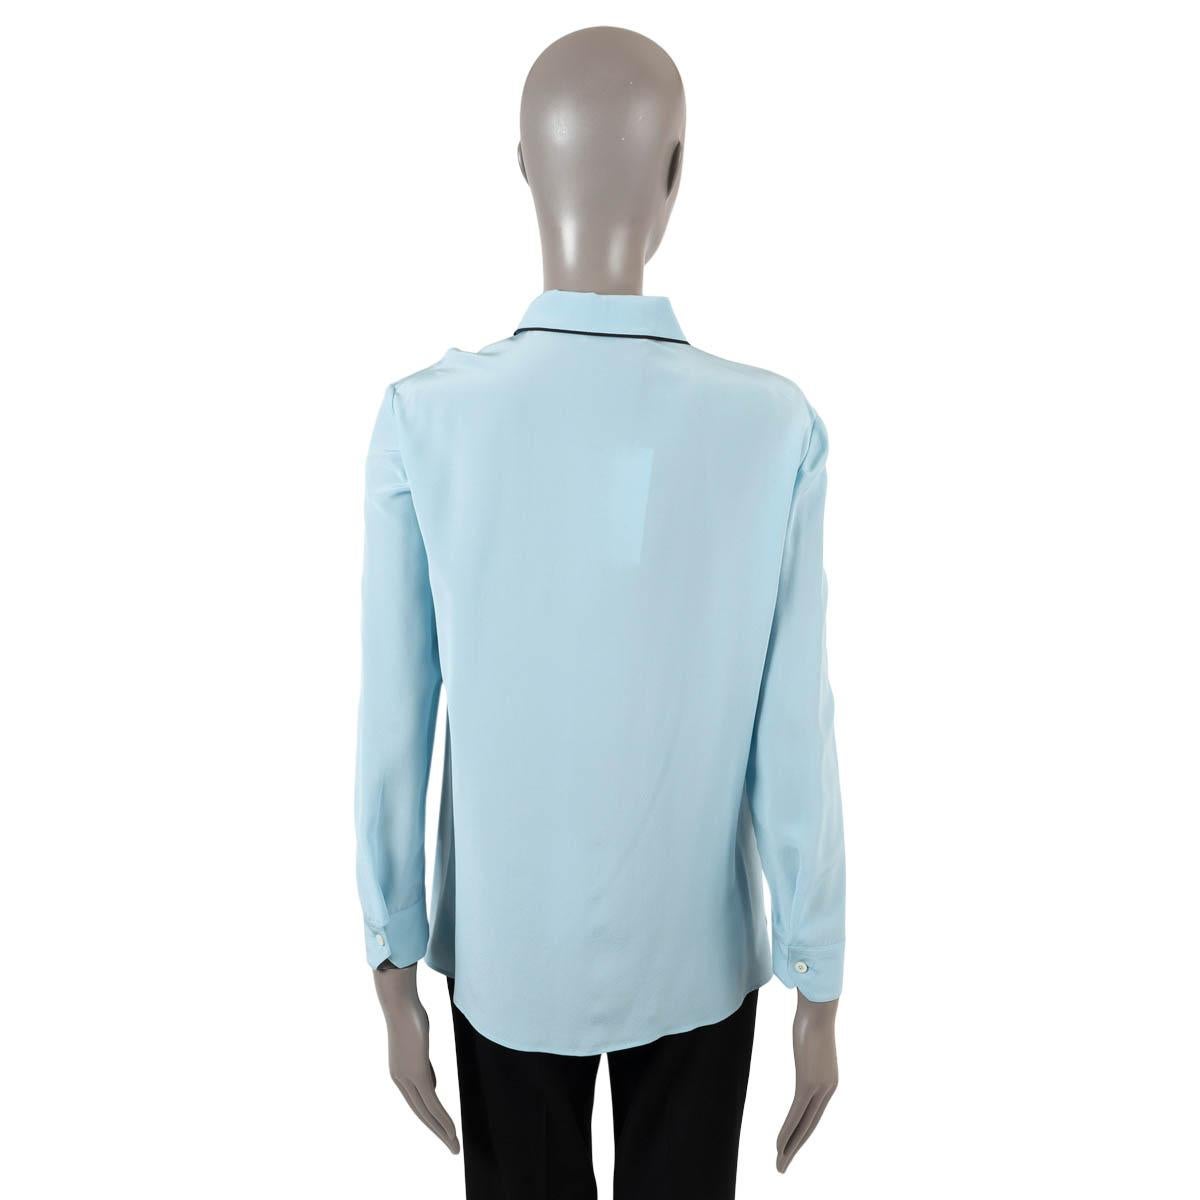 PRADA light blue silk CONTRASTING TRIM CLASSIC Blouse Shirt 40 S In Excellent Condition For Sale In Zürich, CH